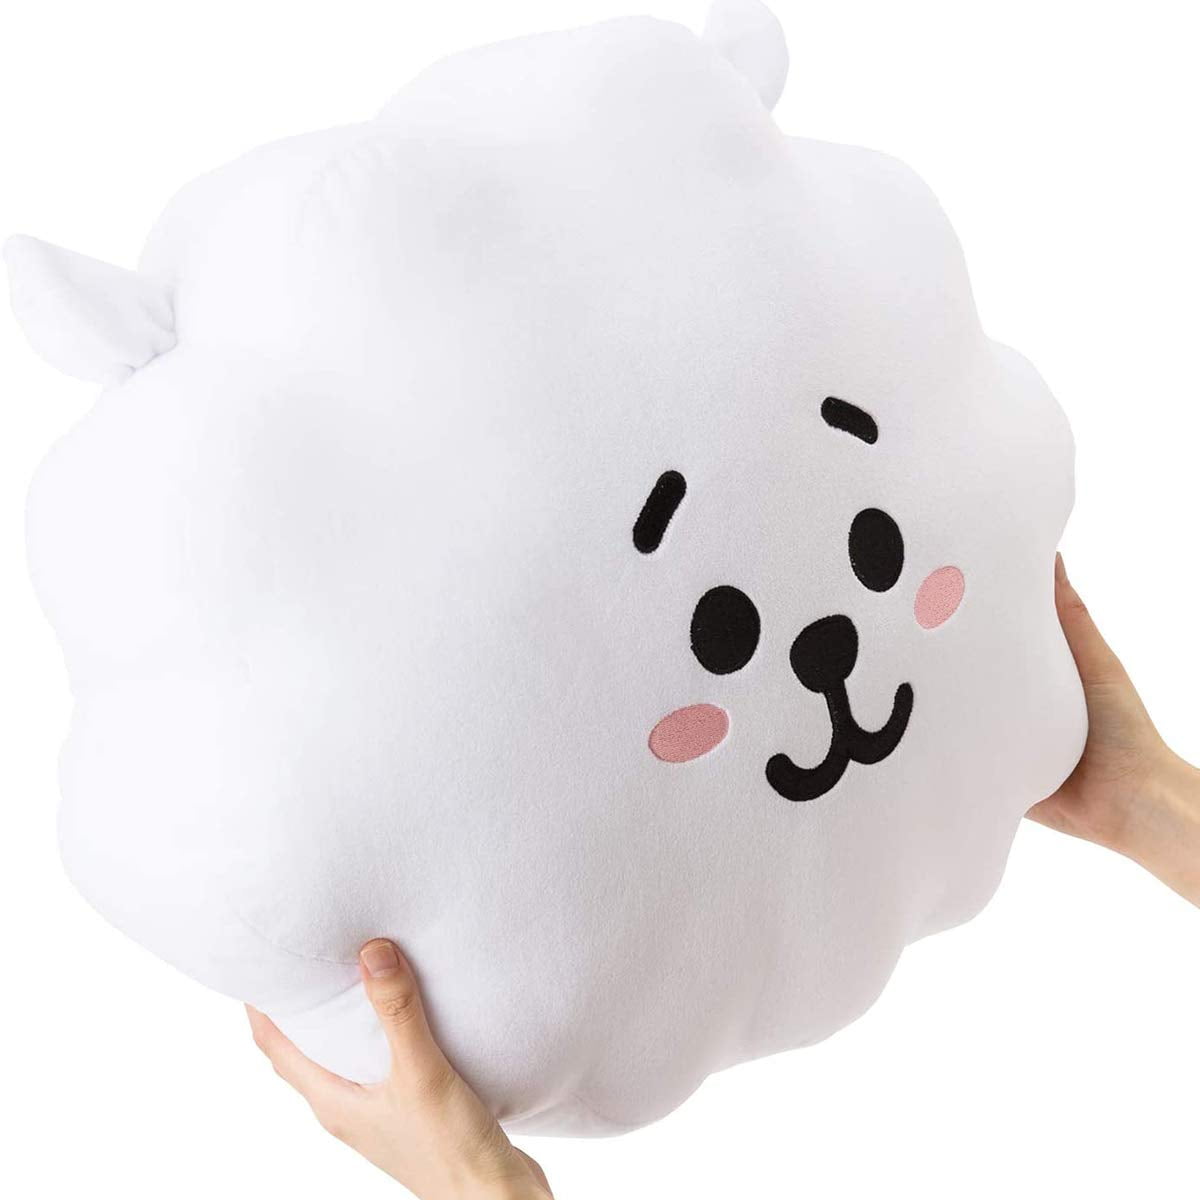 Cooky Cartoon Pillow for Kids Kpop Bangtan Boys Sofa Bedroom Living Room and Car Soft Cotton Plush Pillow for The Army 11.8 inches Plush Toy 